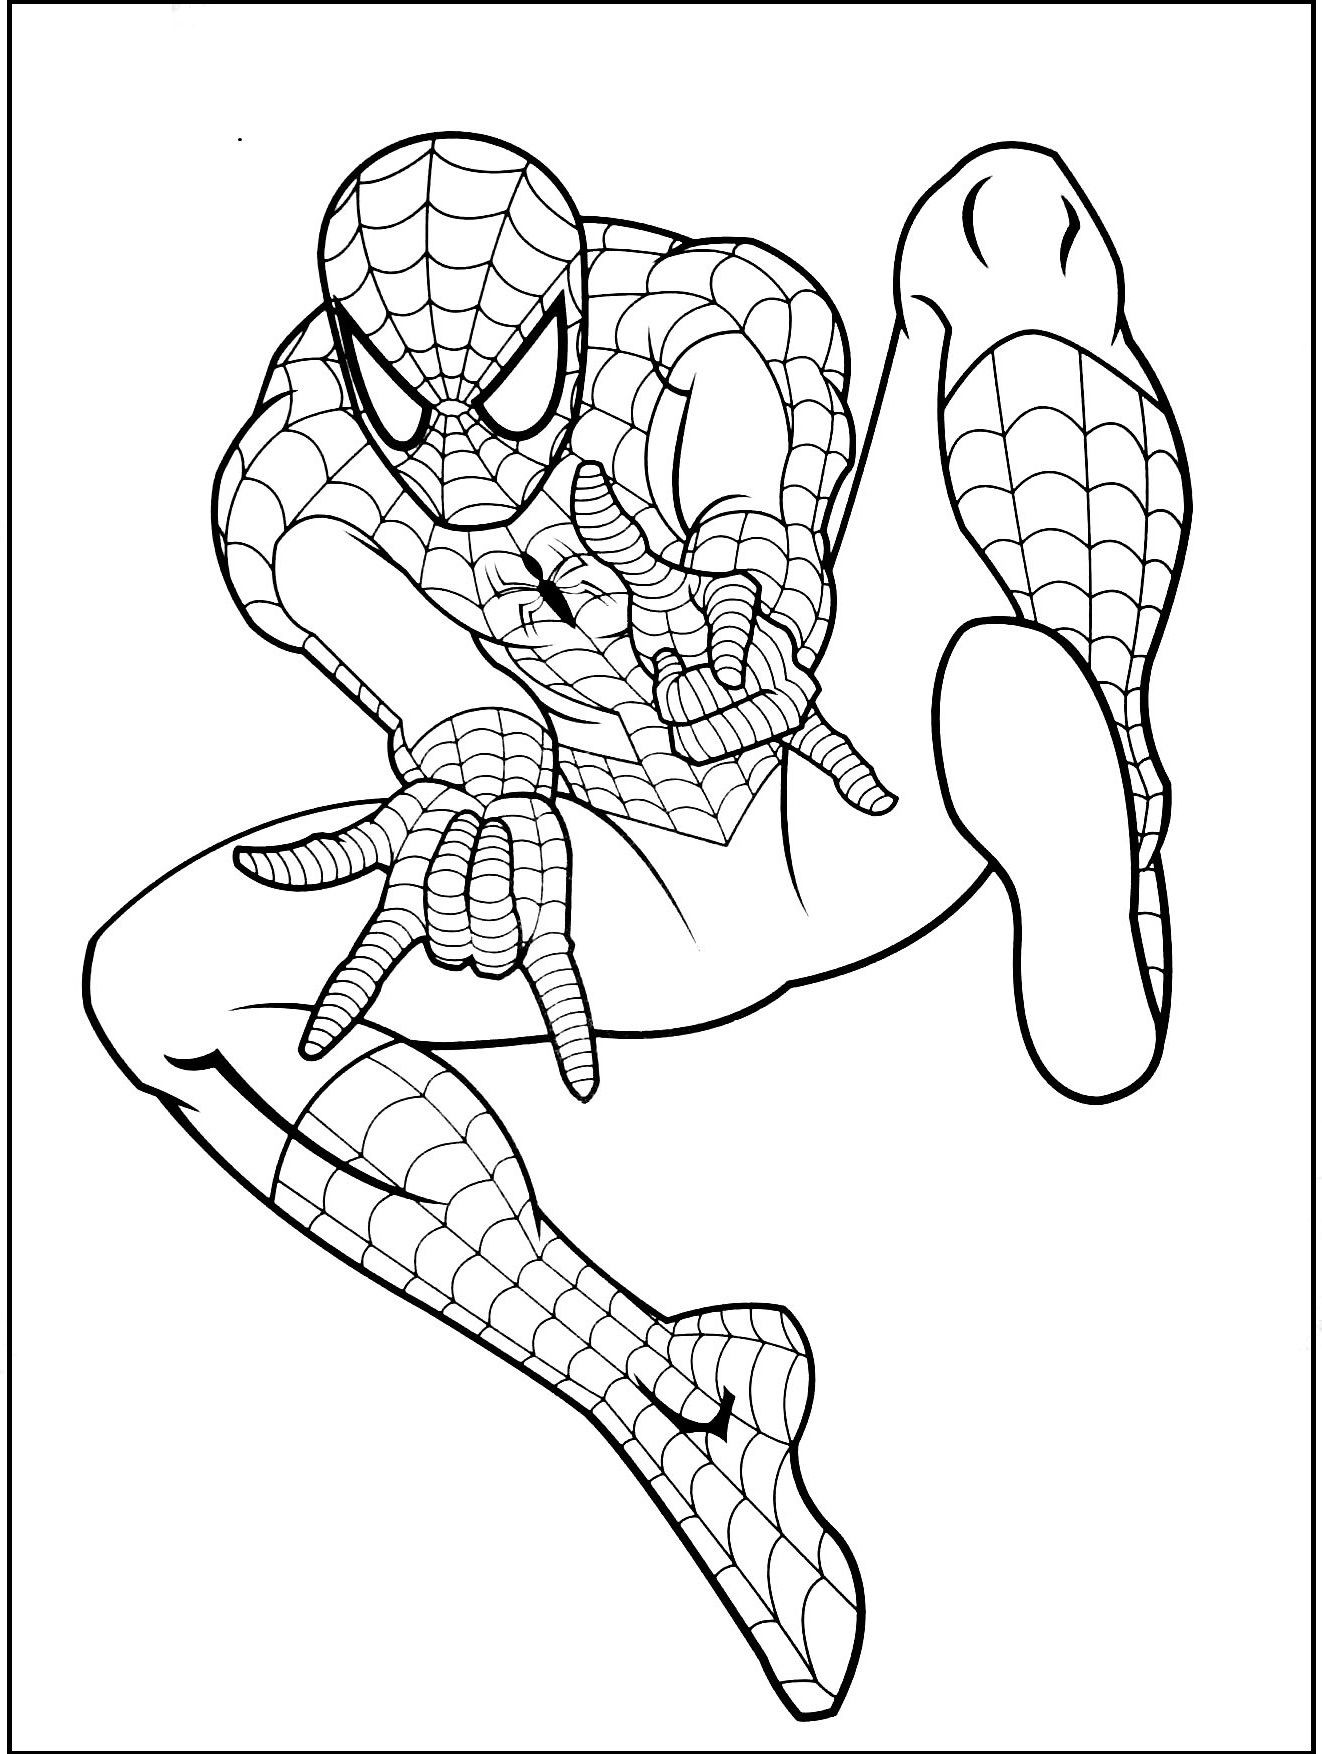 Spiderman Coloring Pages For Toddlers
 Spiderman Gratuit coloring picture for kids Mix Men